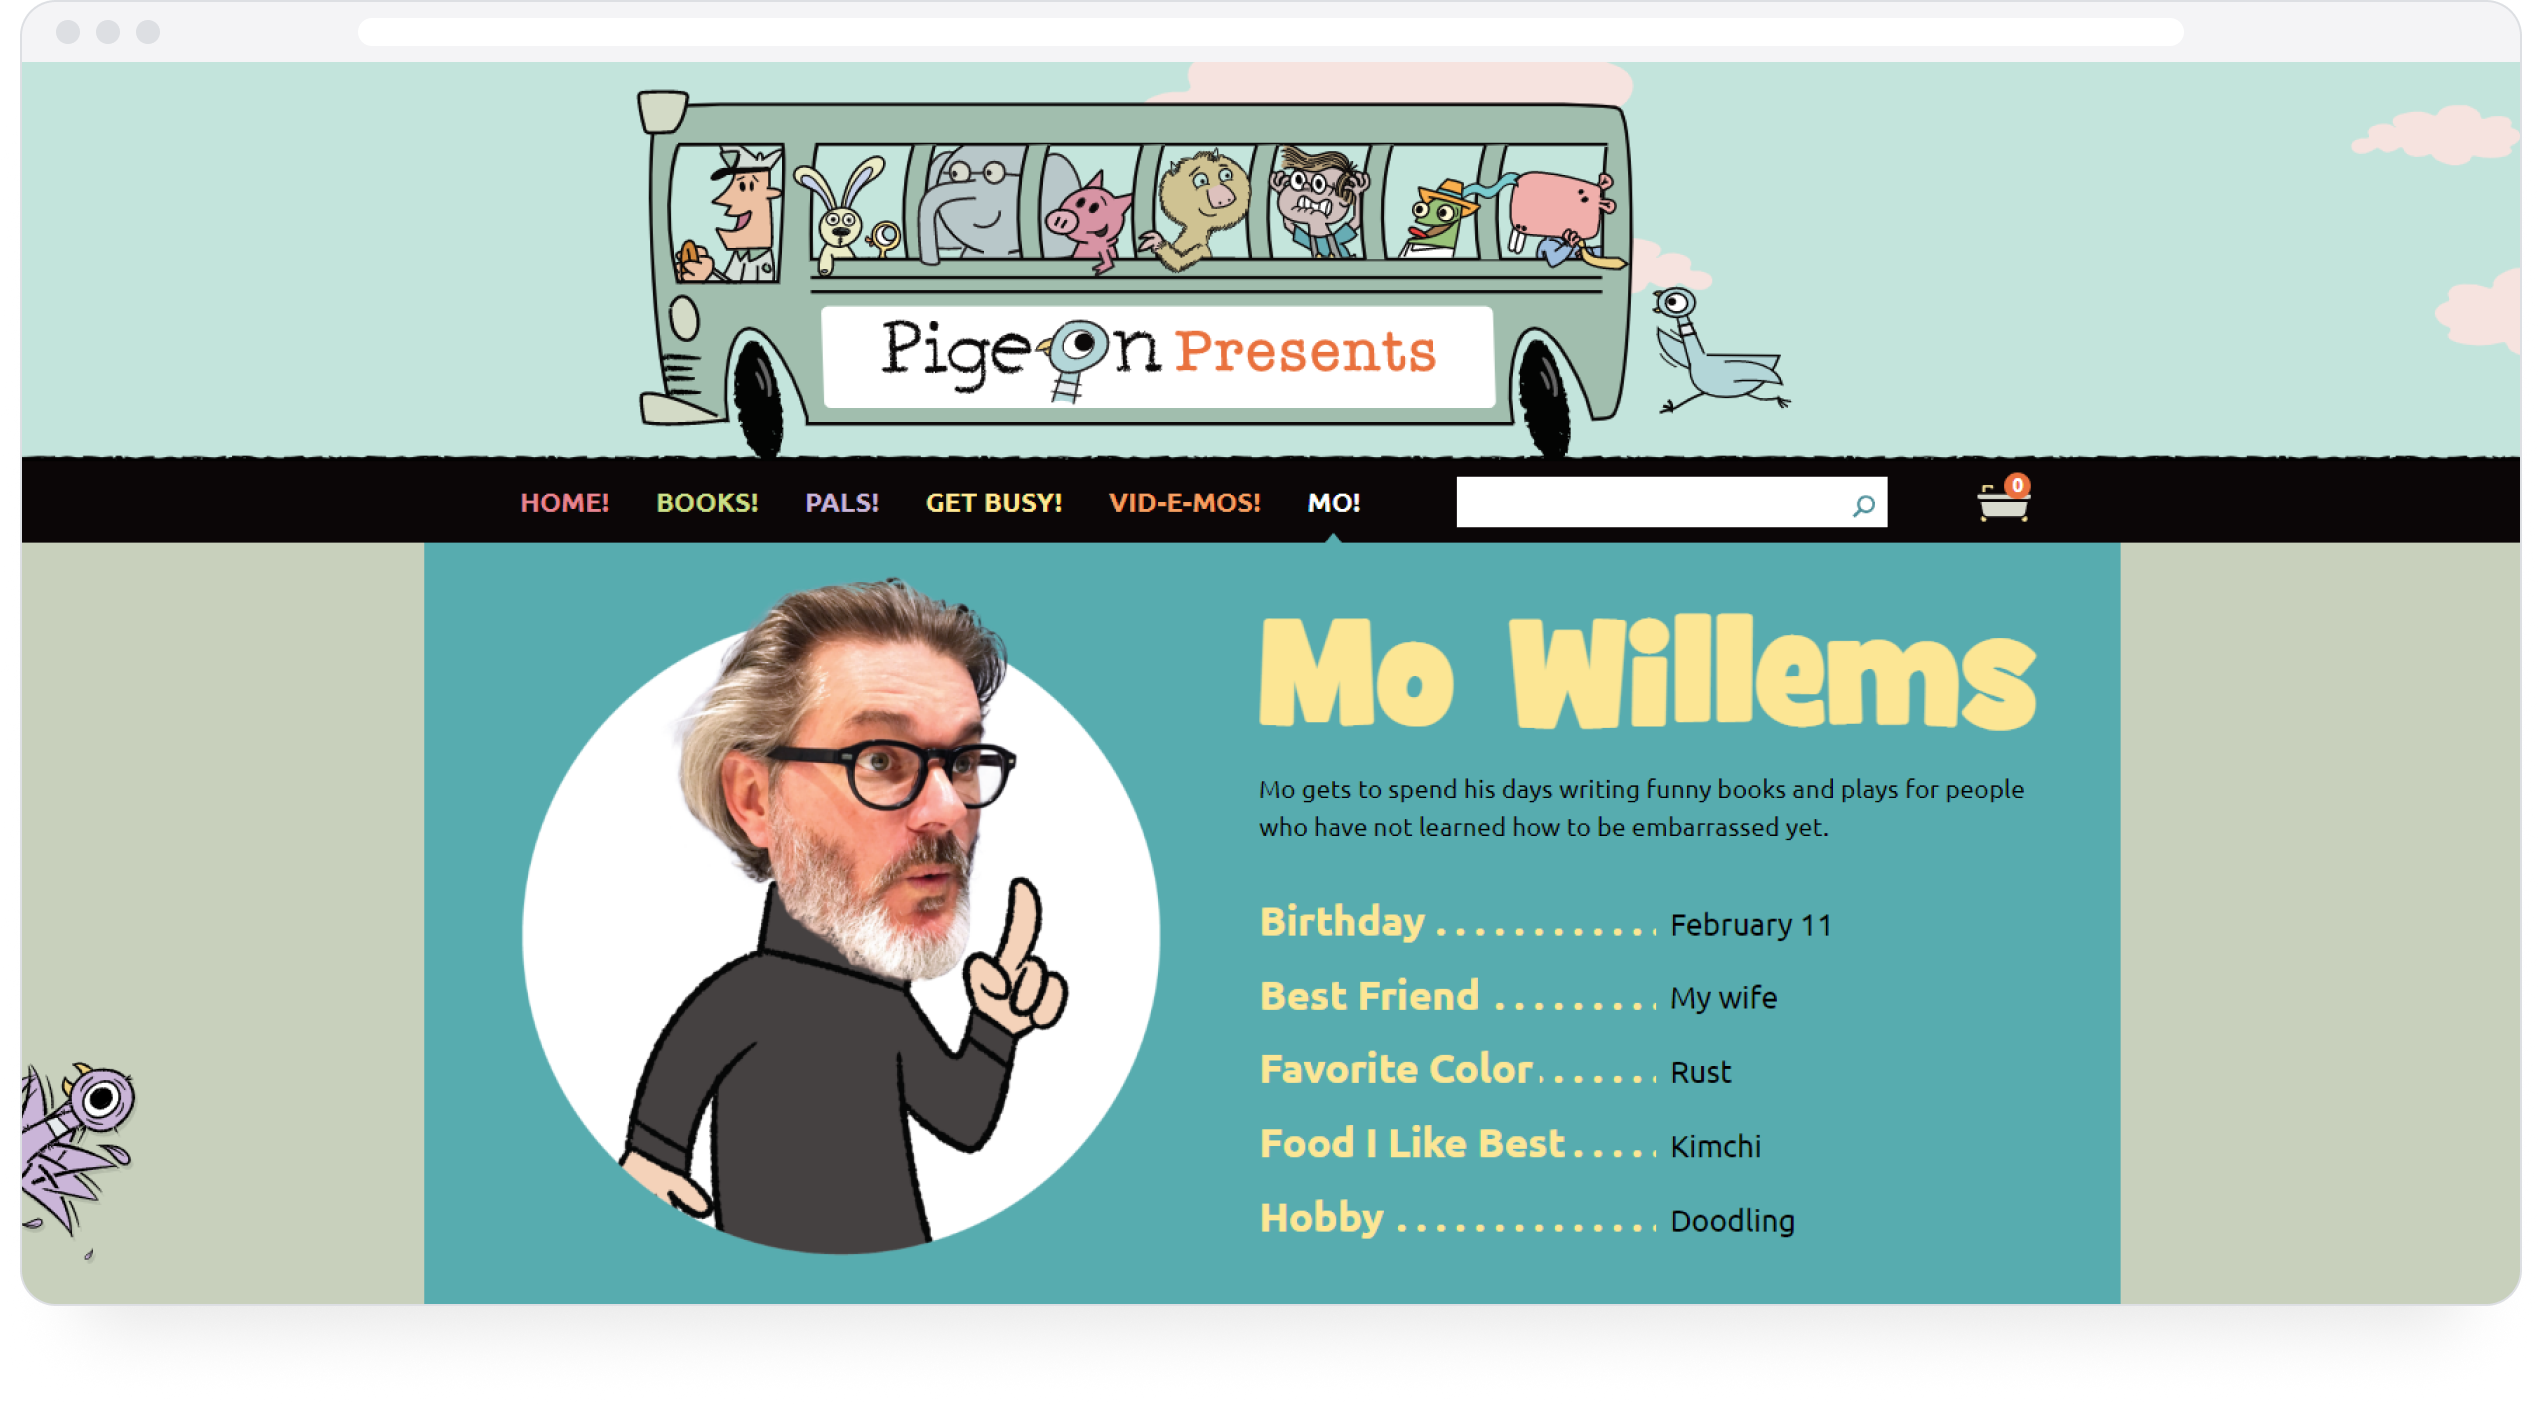 Mo Willems' "About Me" section